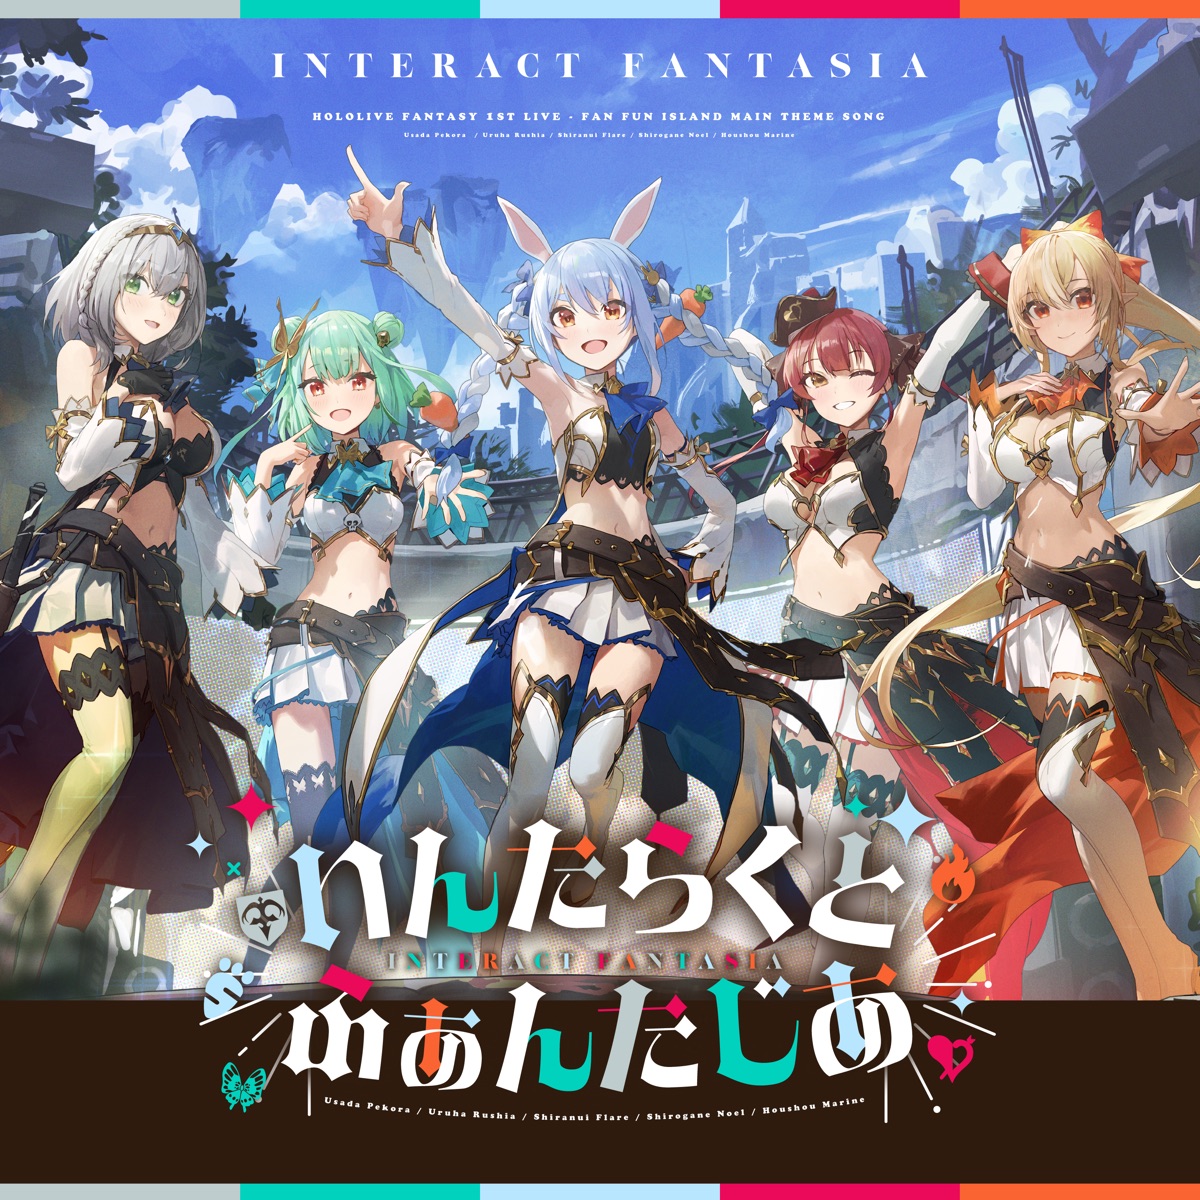 Cover for『hololive Fantasy - Interact Fantasia』from the release『Interact Fantasia』